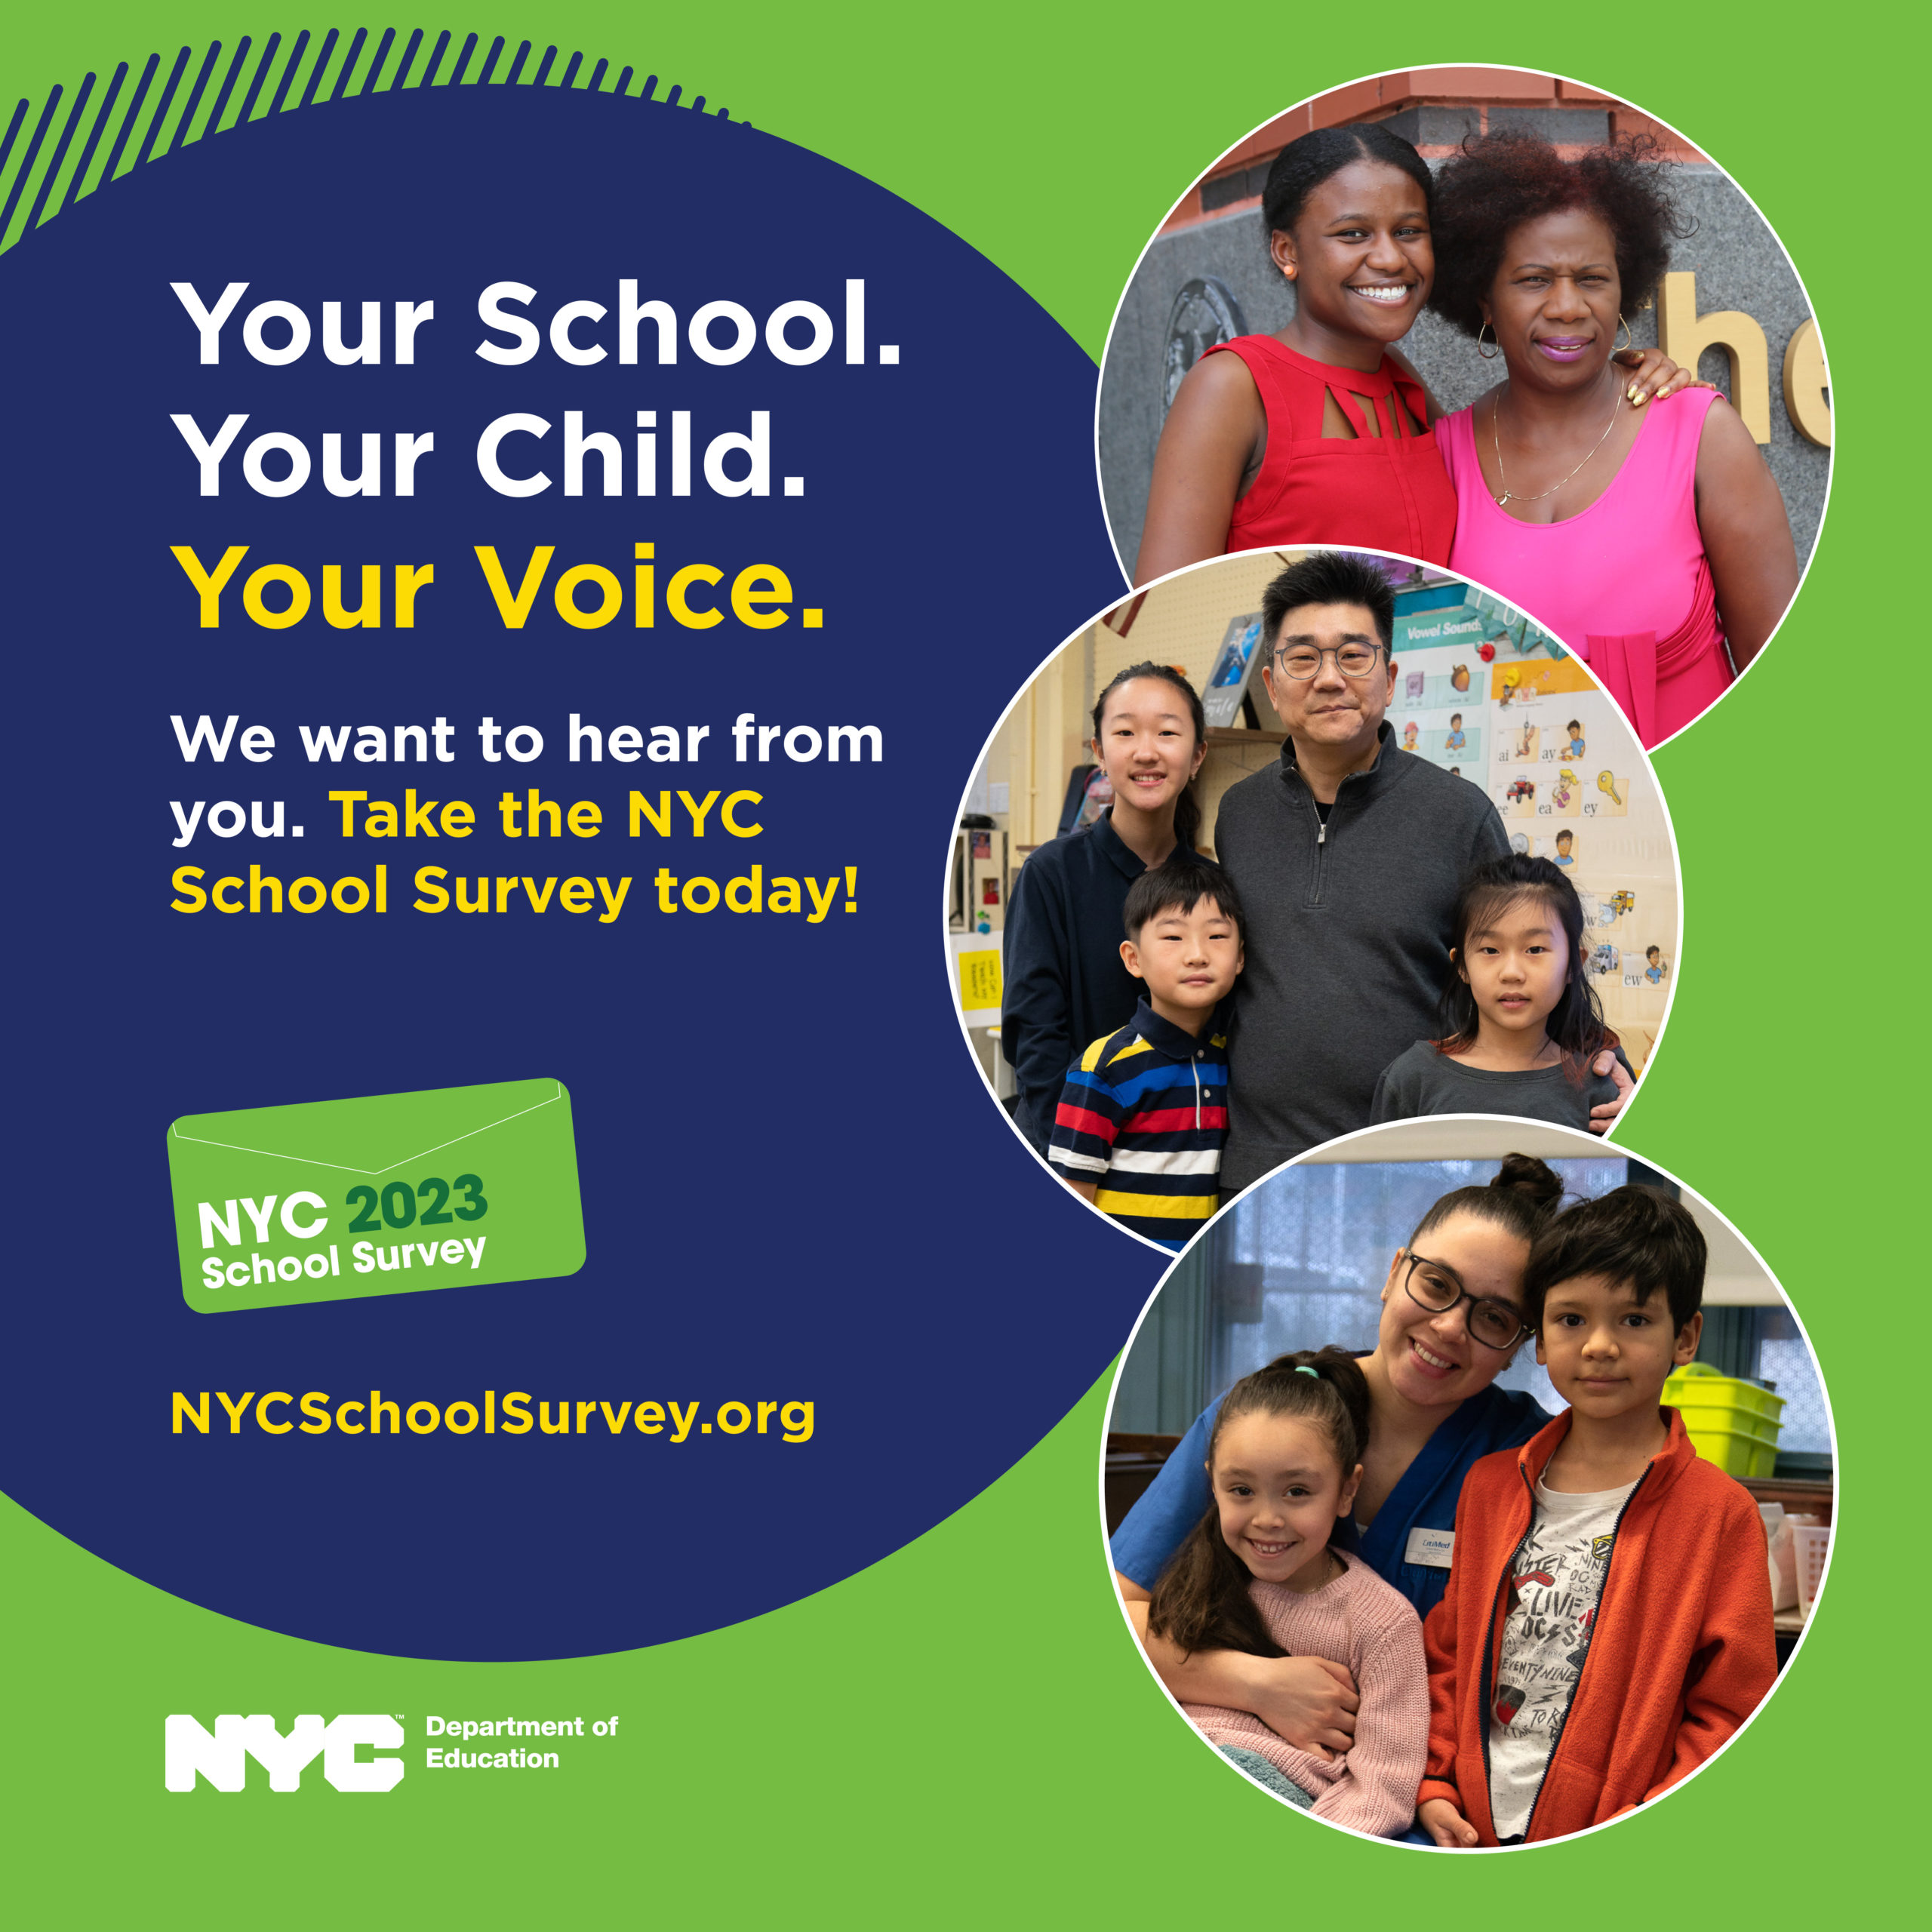 NYC School Survey 2023 – Due March 31st